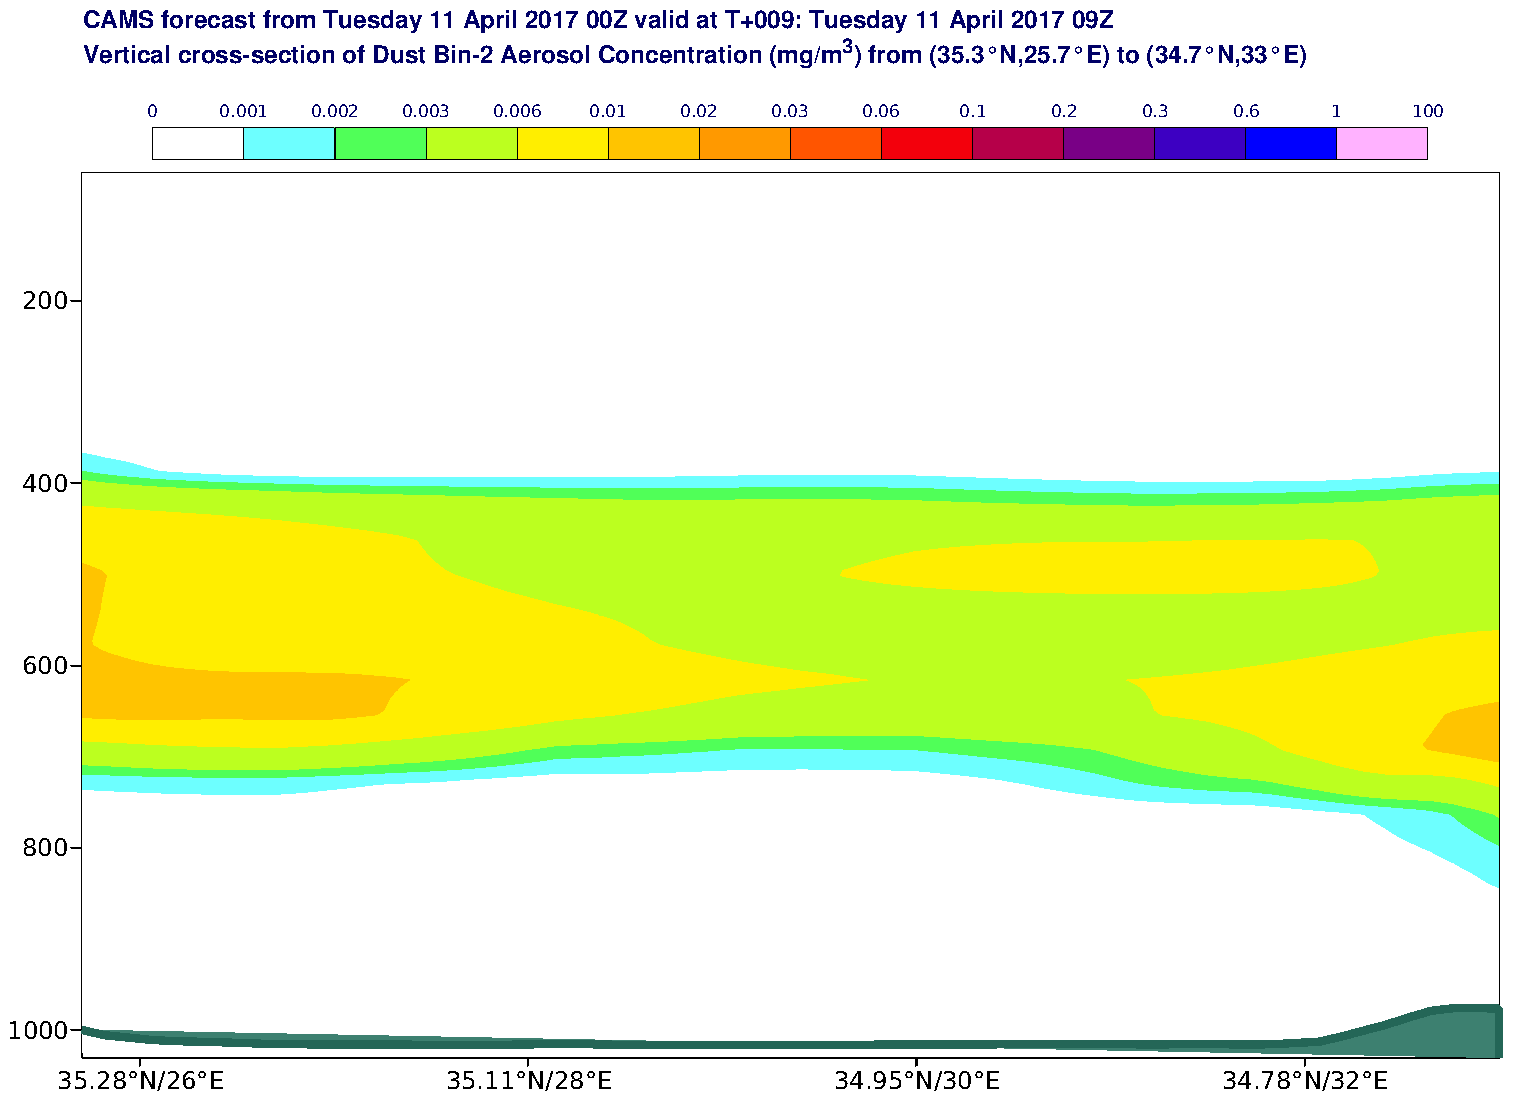 Vertical cross-section of Dust Bin-2 Aerosol Concentration (mg/m3) valid at T9 - 2017-04-11 09:00